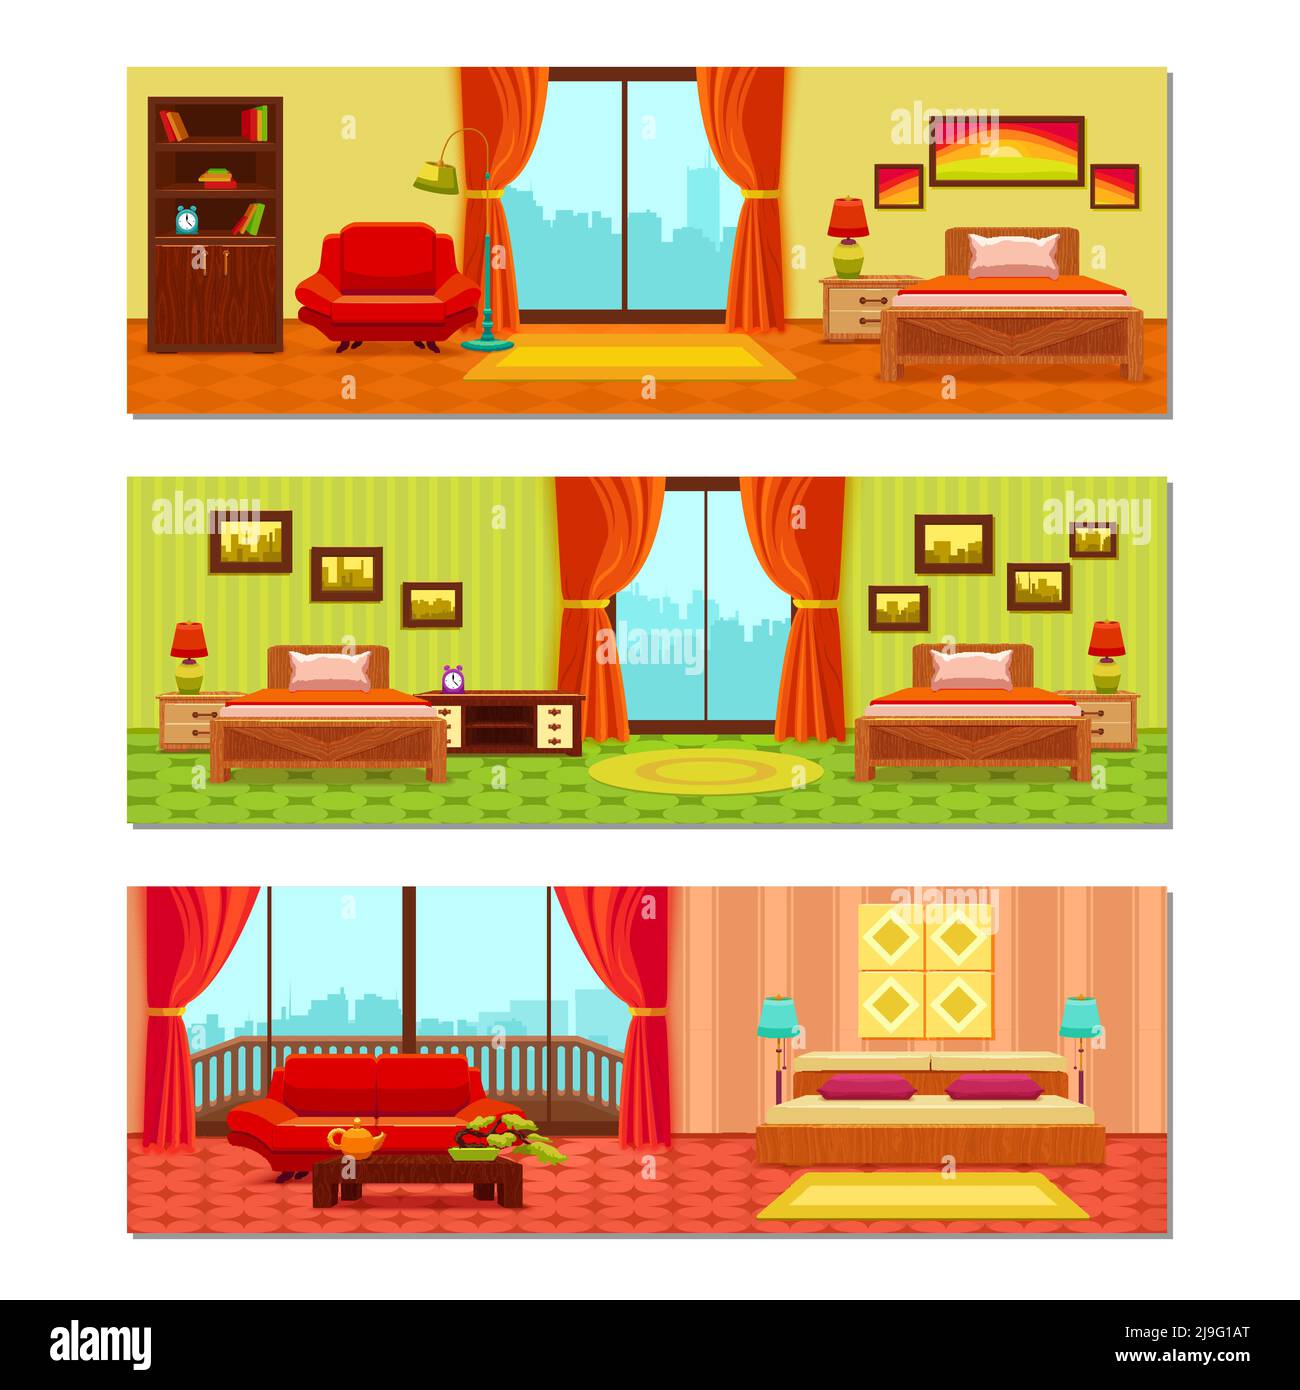 Hotel rooms compositions with beds tiled floor city scenery outside windows pictures on walls isolated vector illustration Stock Vector